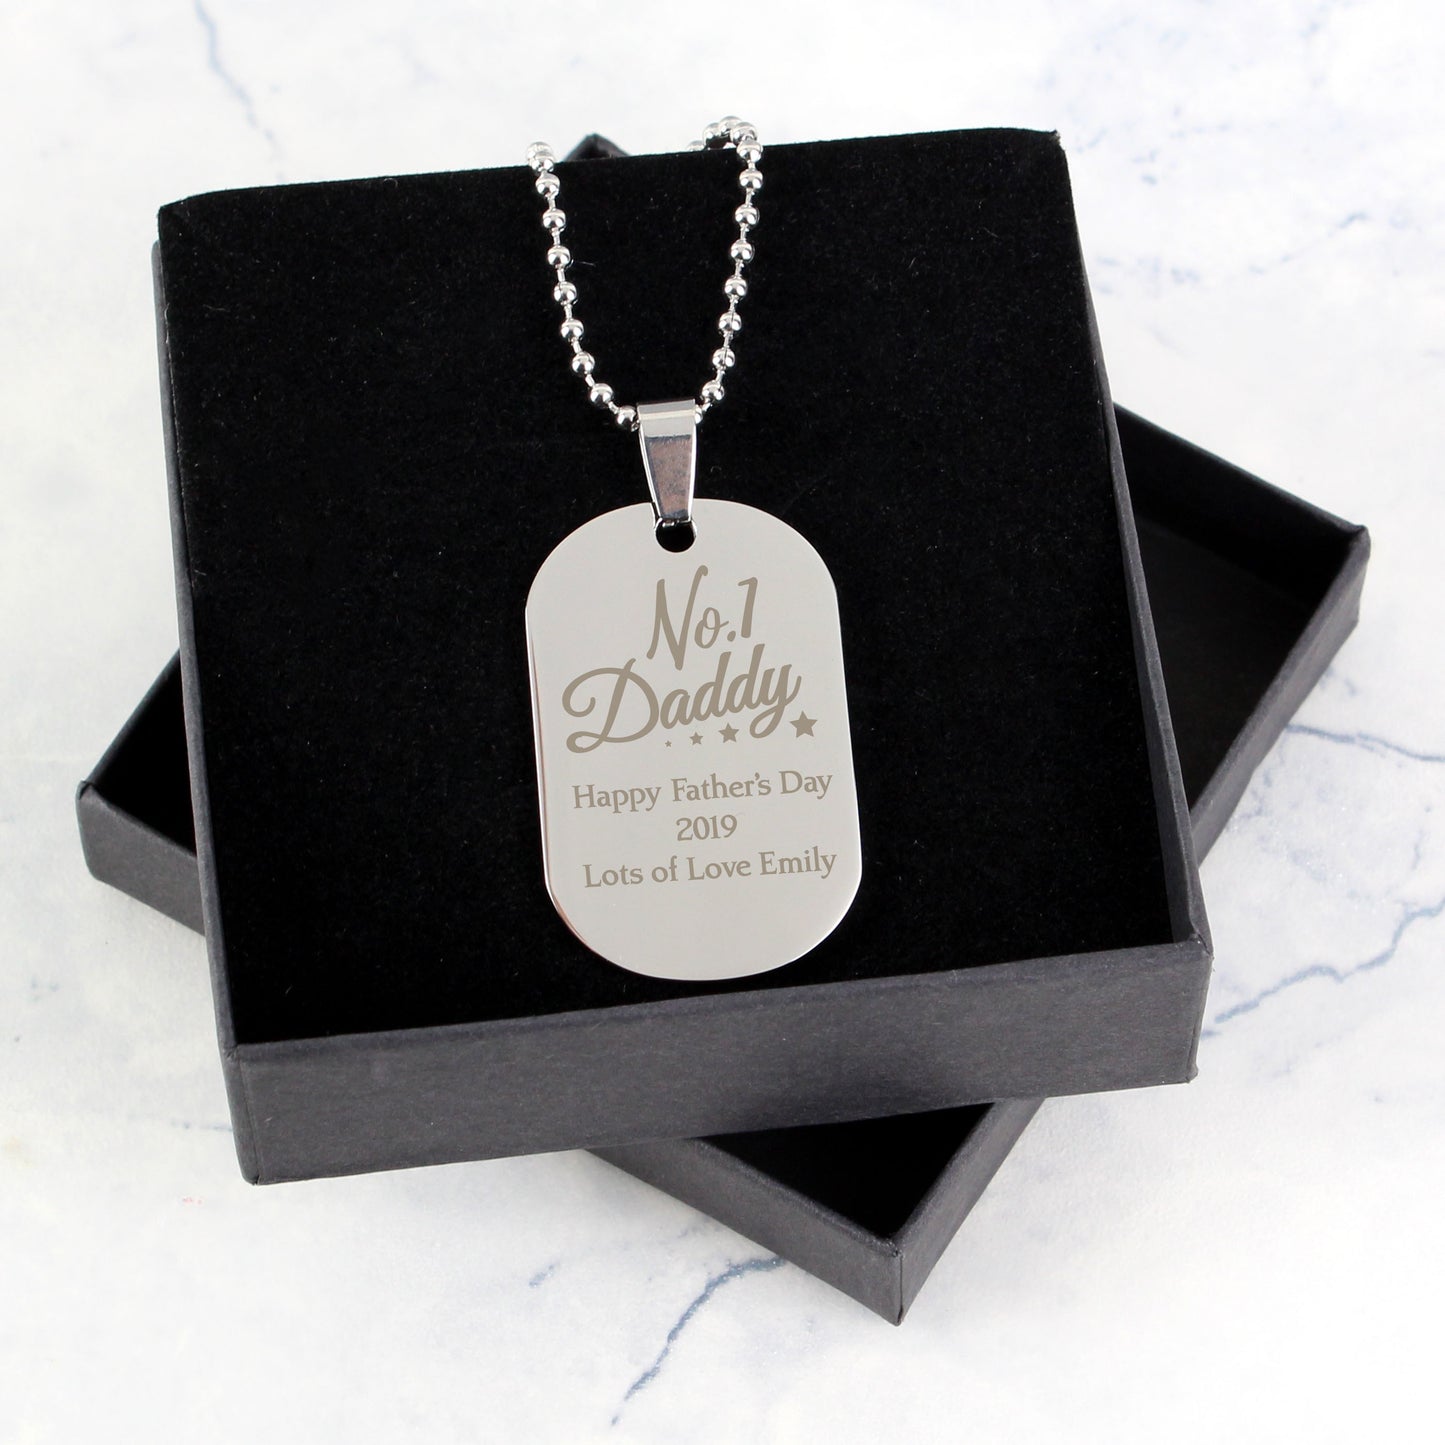 Personalised No.1 Daddy Stainless Steel Dog Tag Necklace - Personalise It!